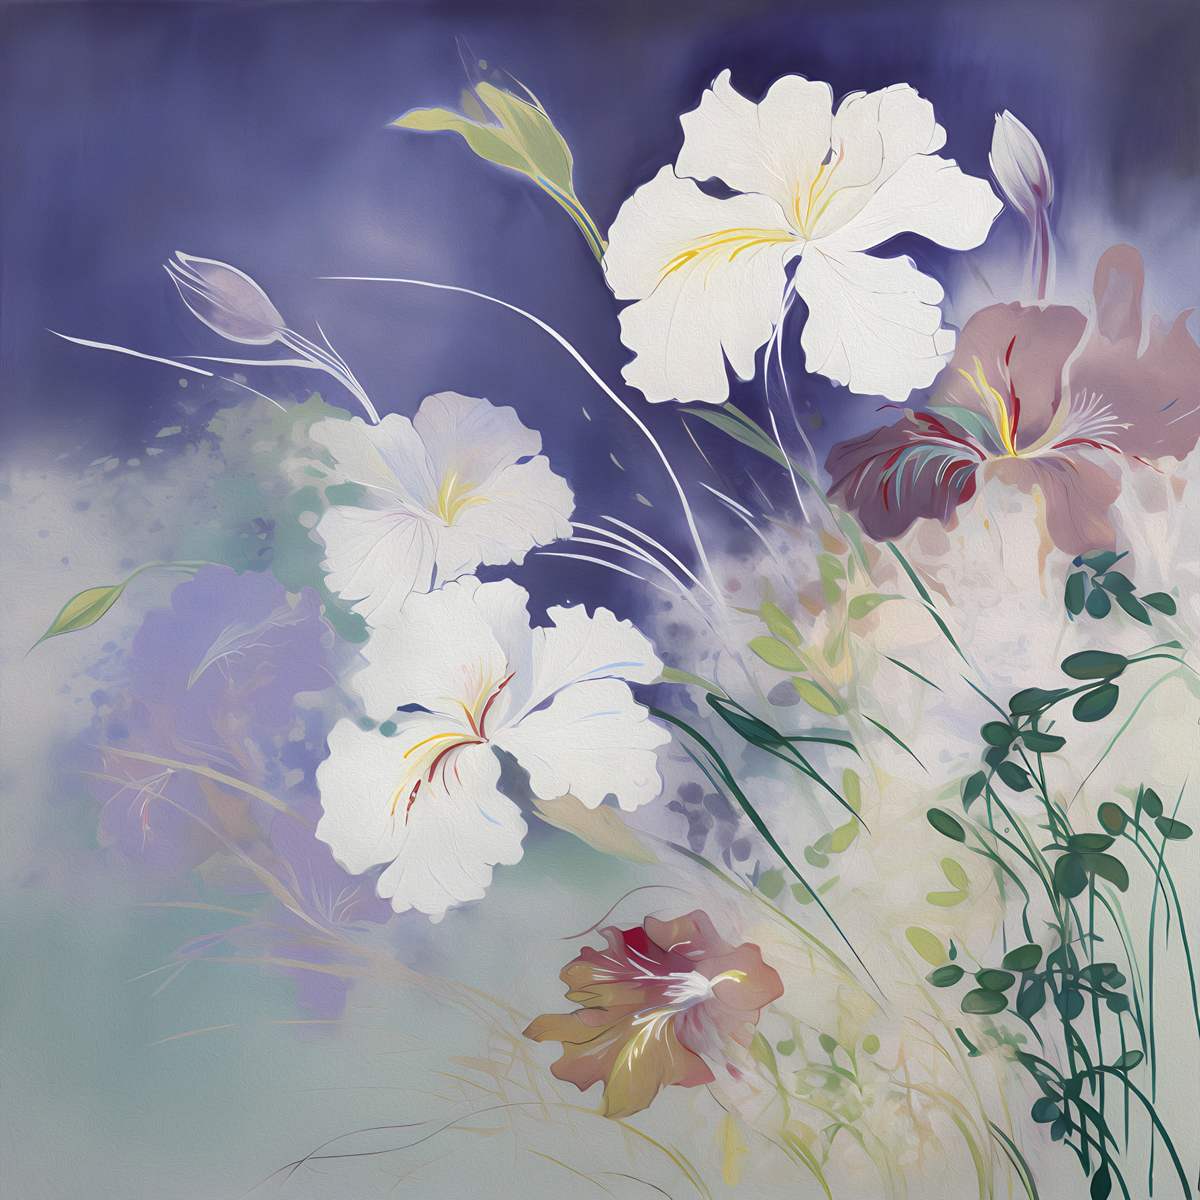  Graceful Whispers: 'White Flowers In The Wind' Art Collection - Art Print on Canvas. Artemyst